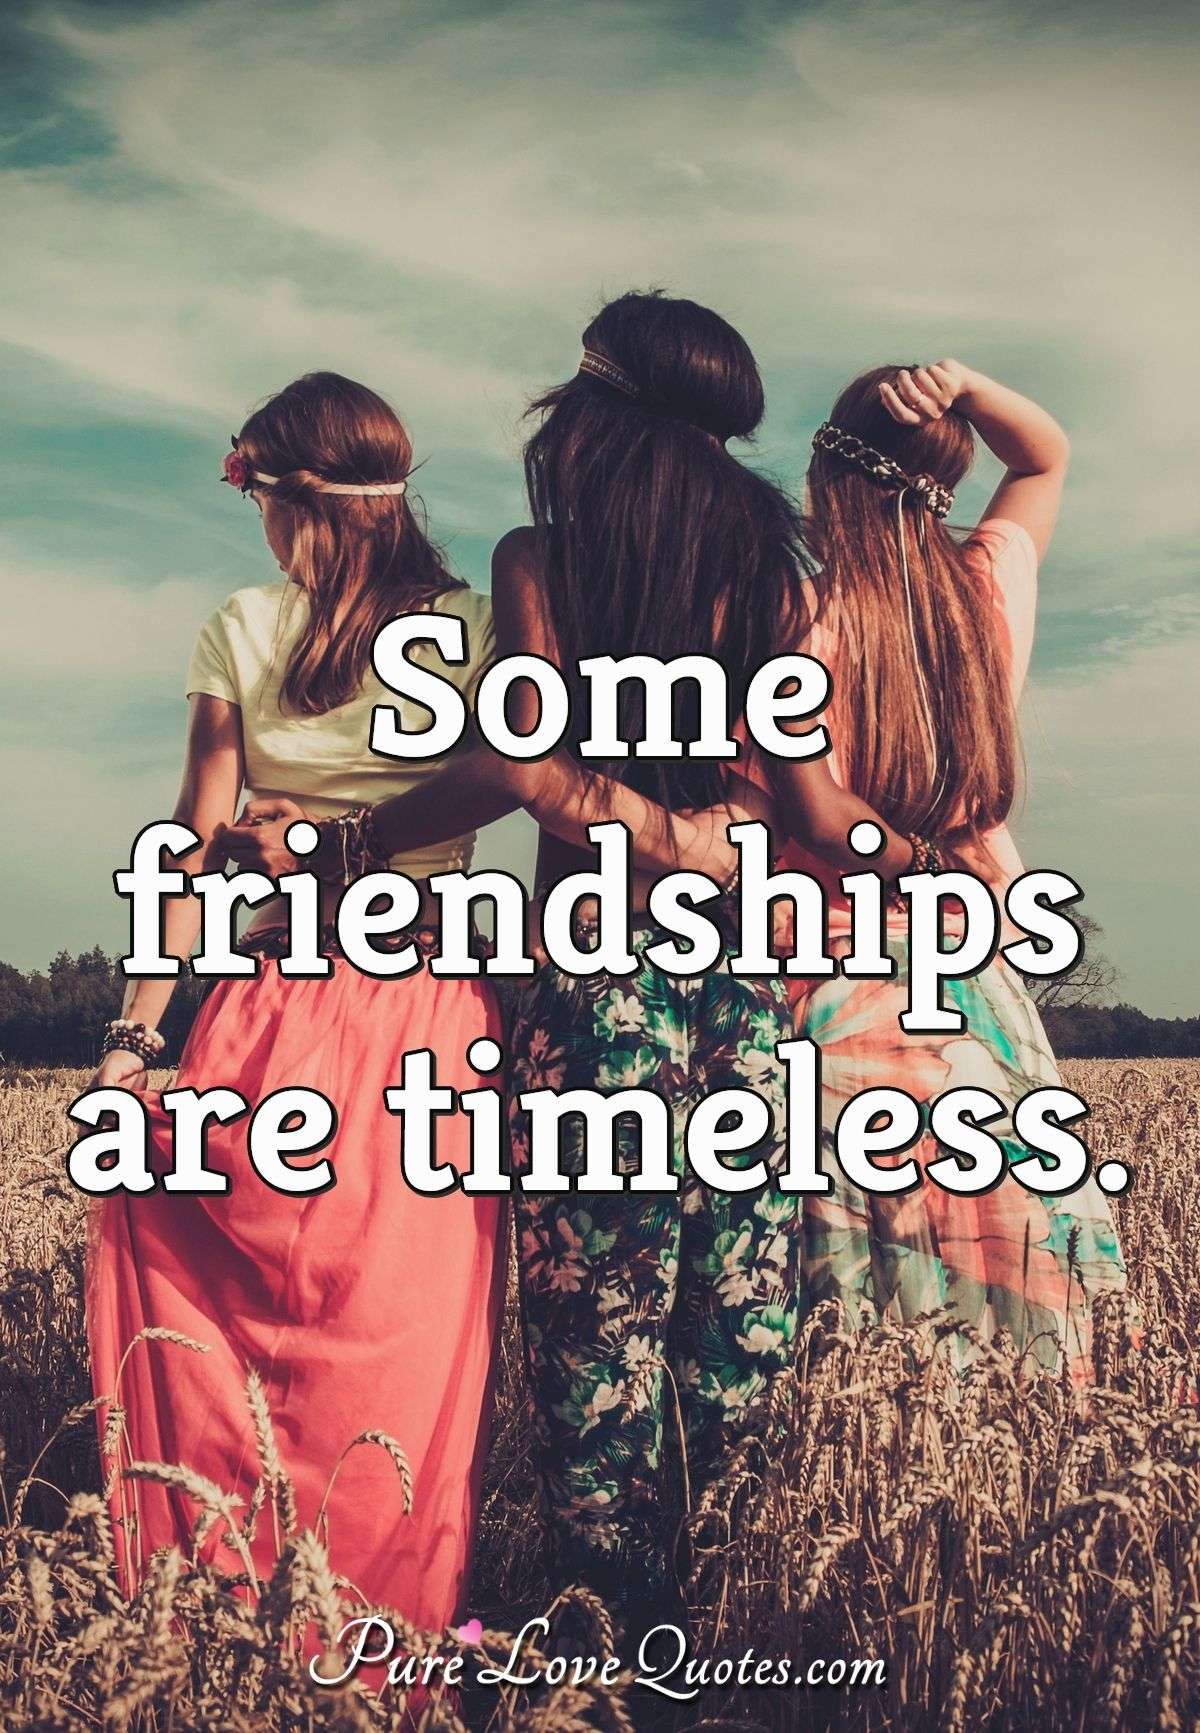 Some friendships are timeless. - Anonymous